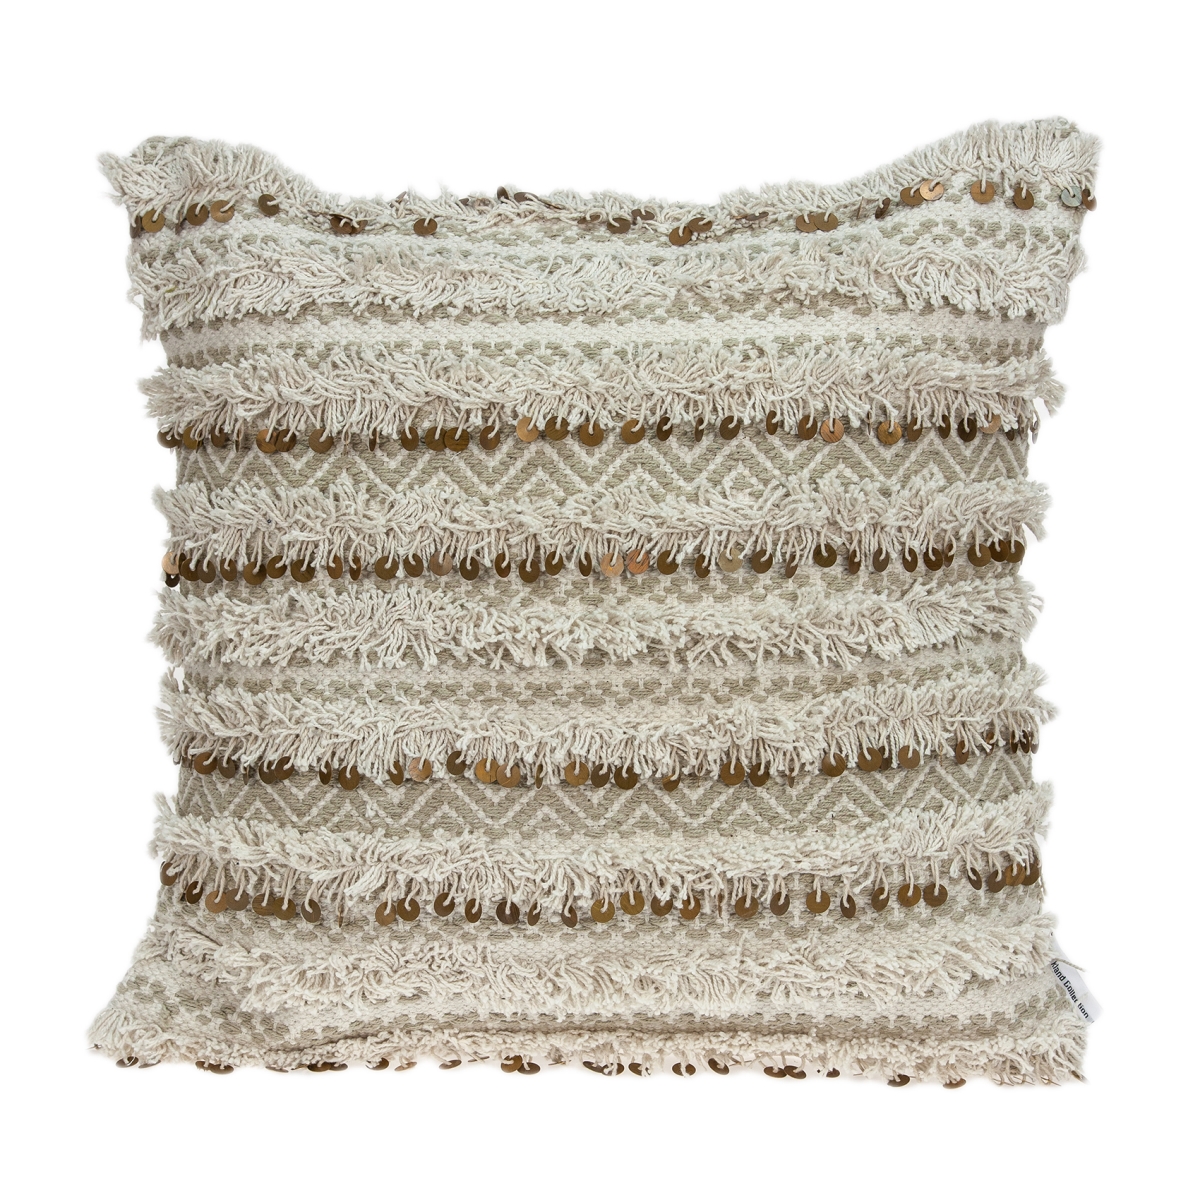 Pild11128p Hailey Beige & Tan Square Bohemian Pillow Cover With Poly Insert - 20 X 20 X 7 In.